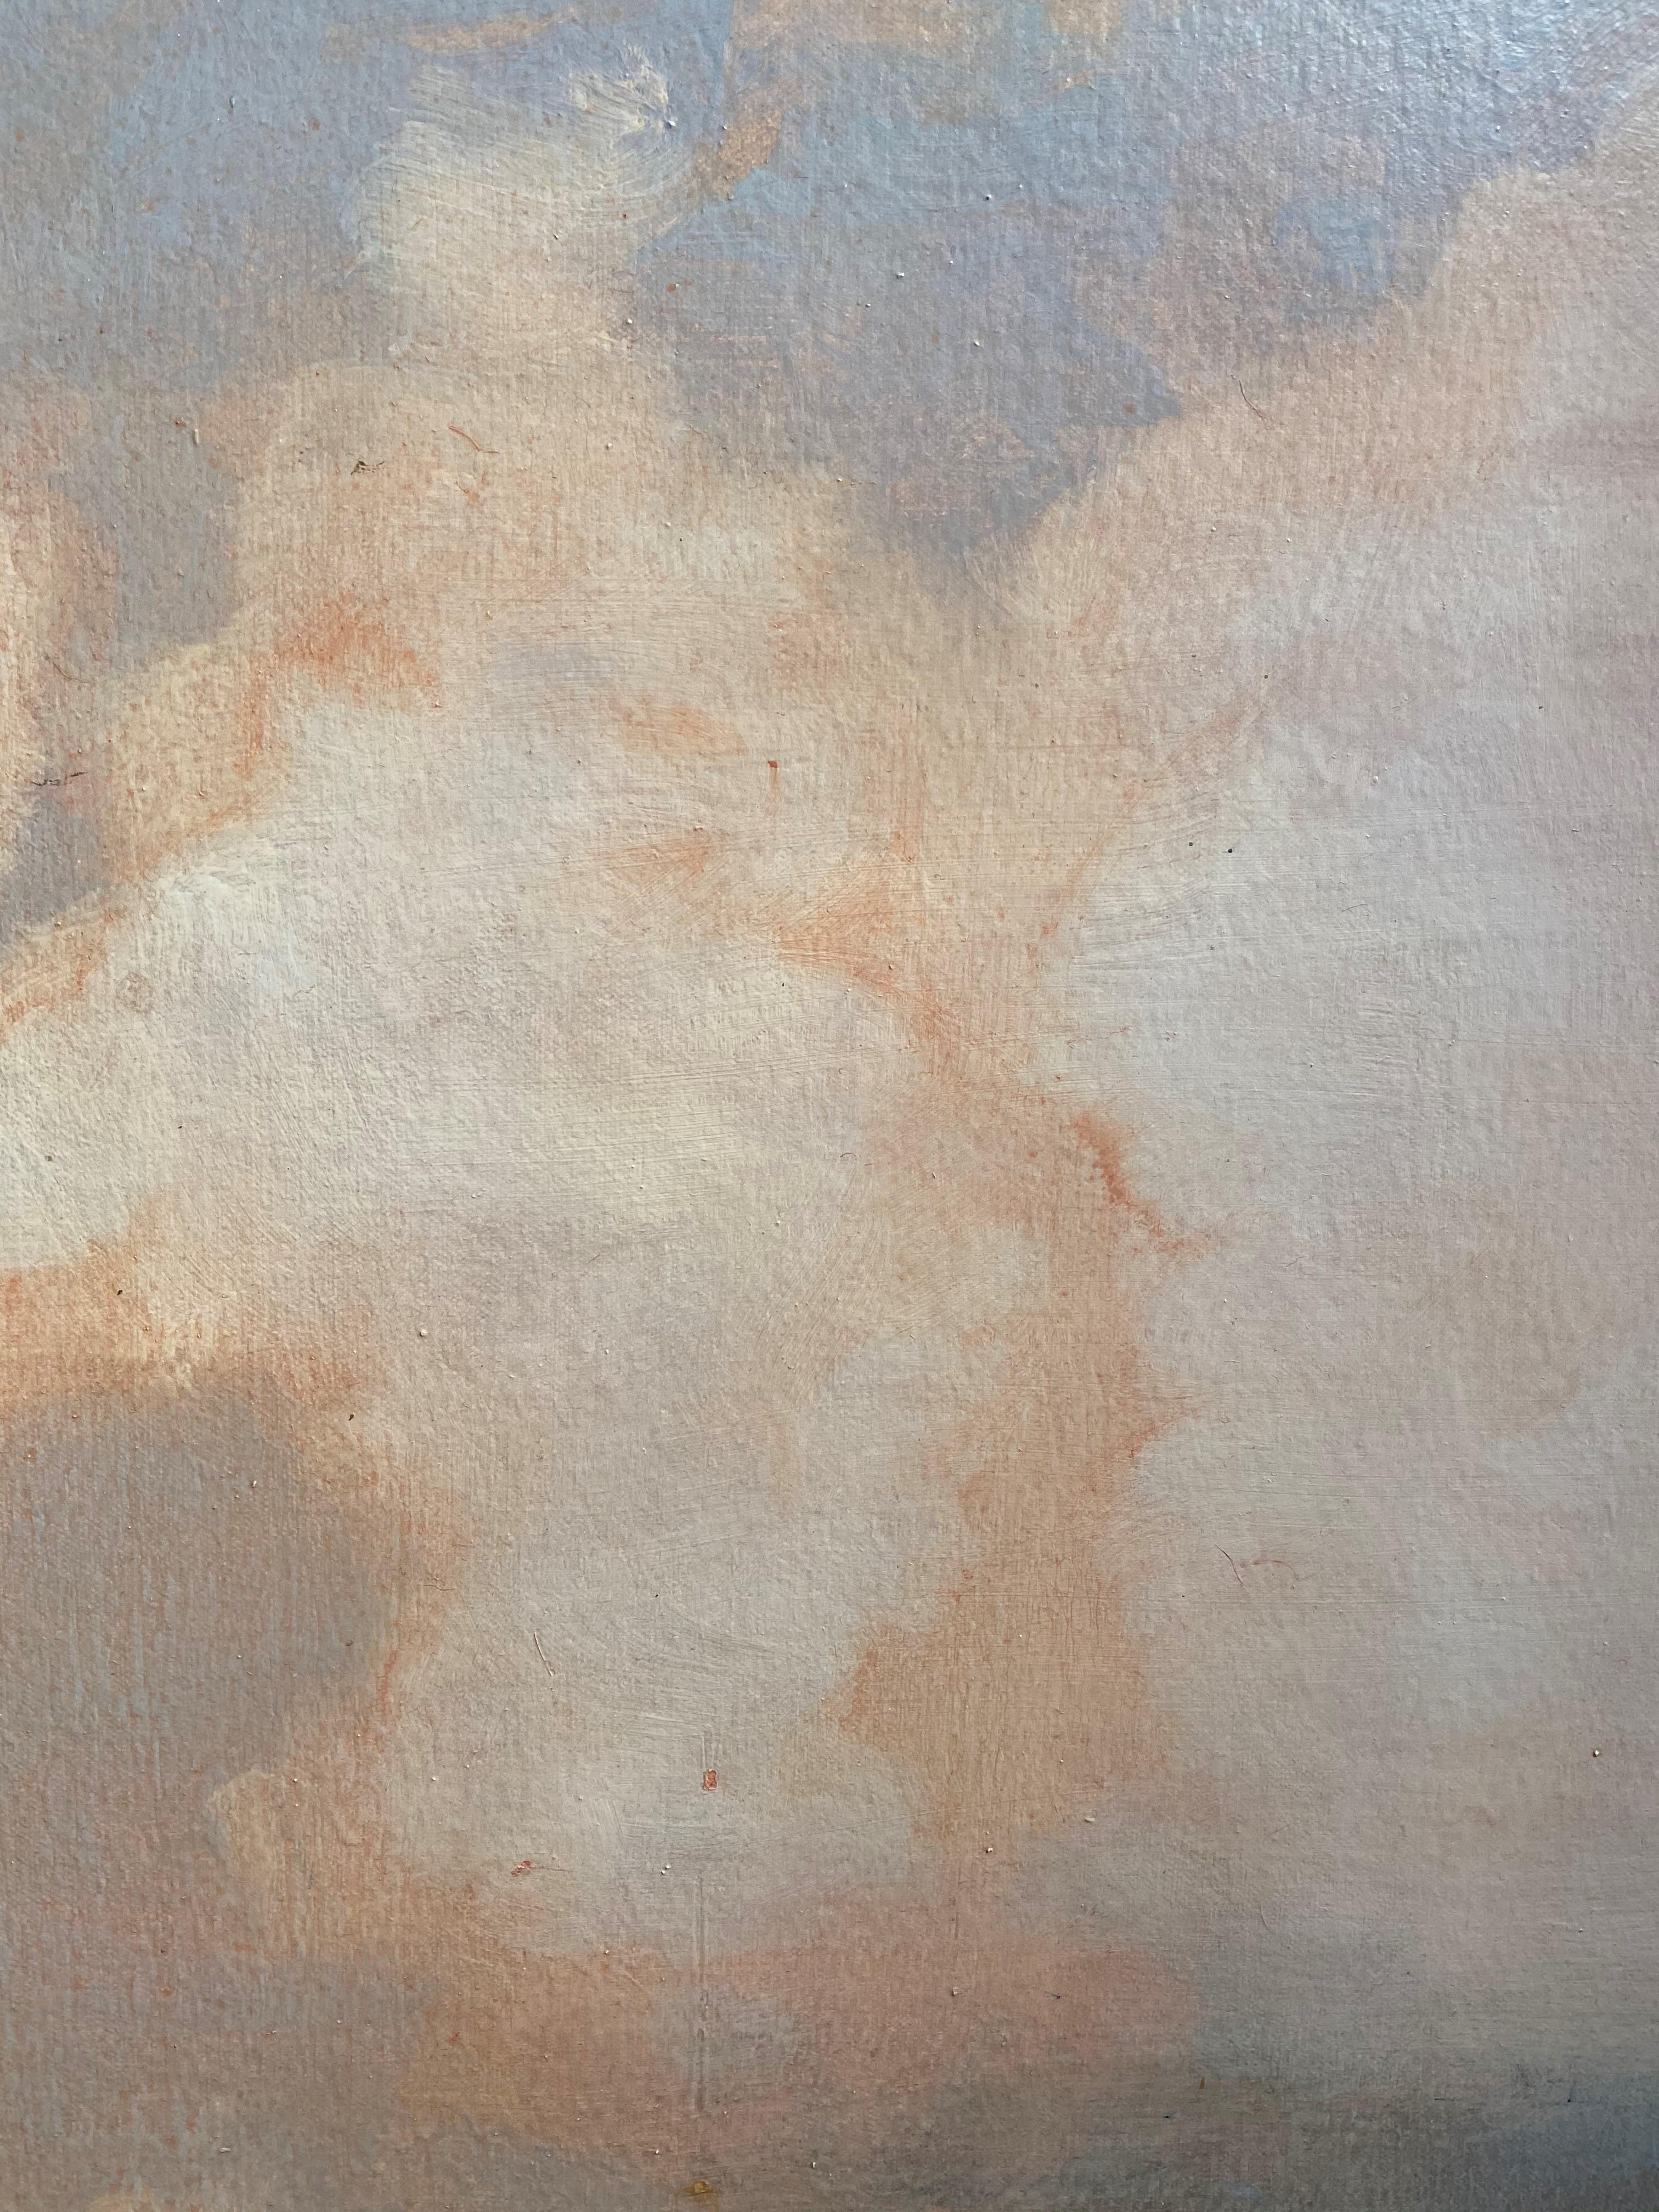 The drama of the sky in New York State's Hudson Valley is captured in this cloudscape painting in oil on panel by David Konigsberg. The artist is widely recognized for clouds and this painting is one of his best - it is a symphony of ivory clouds